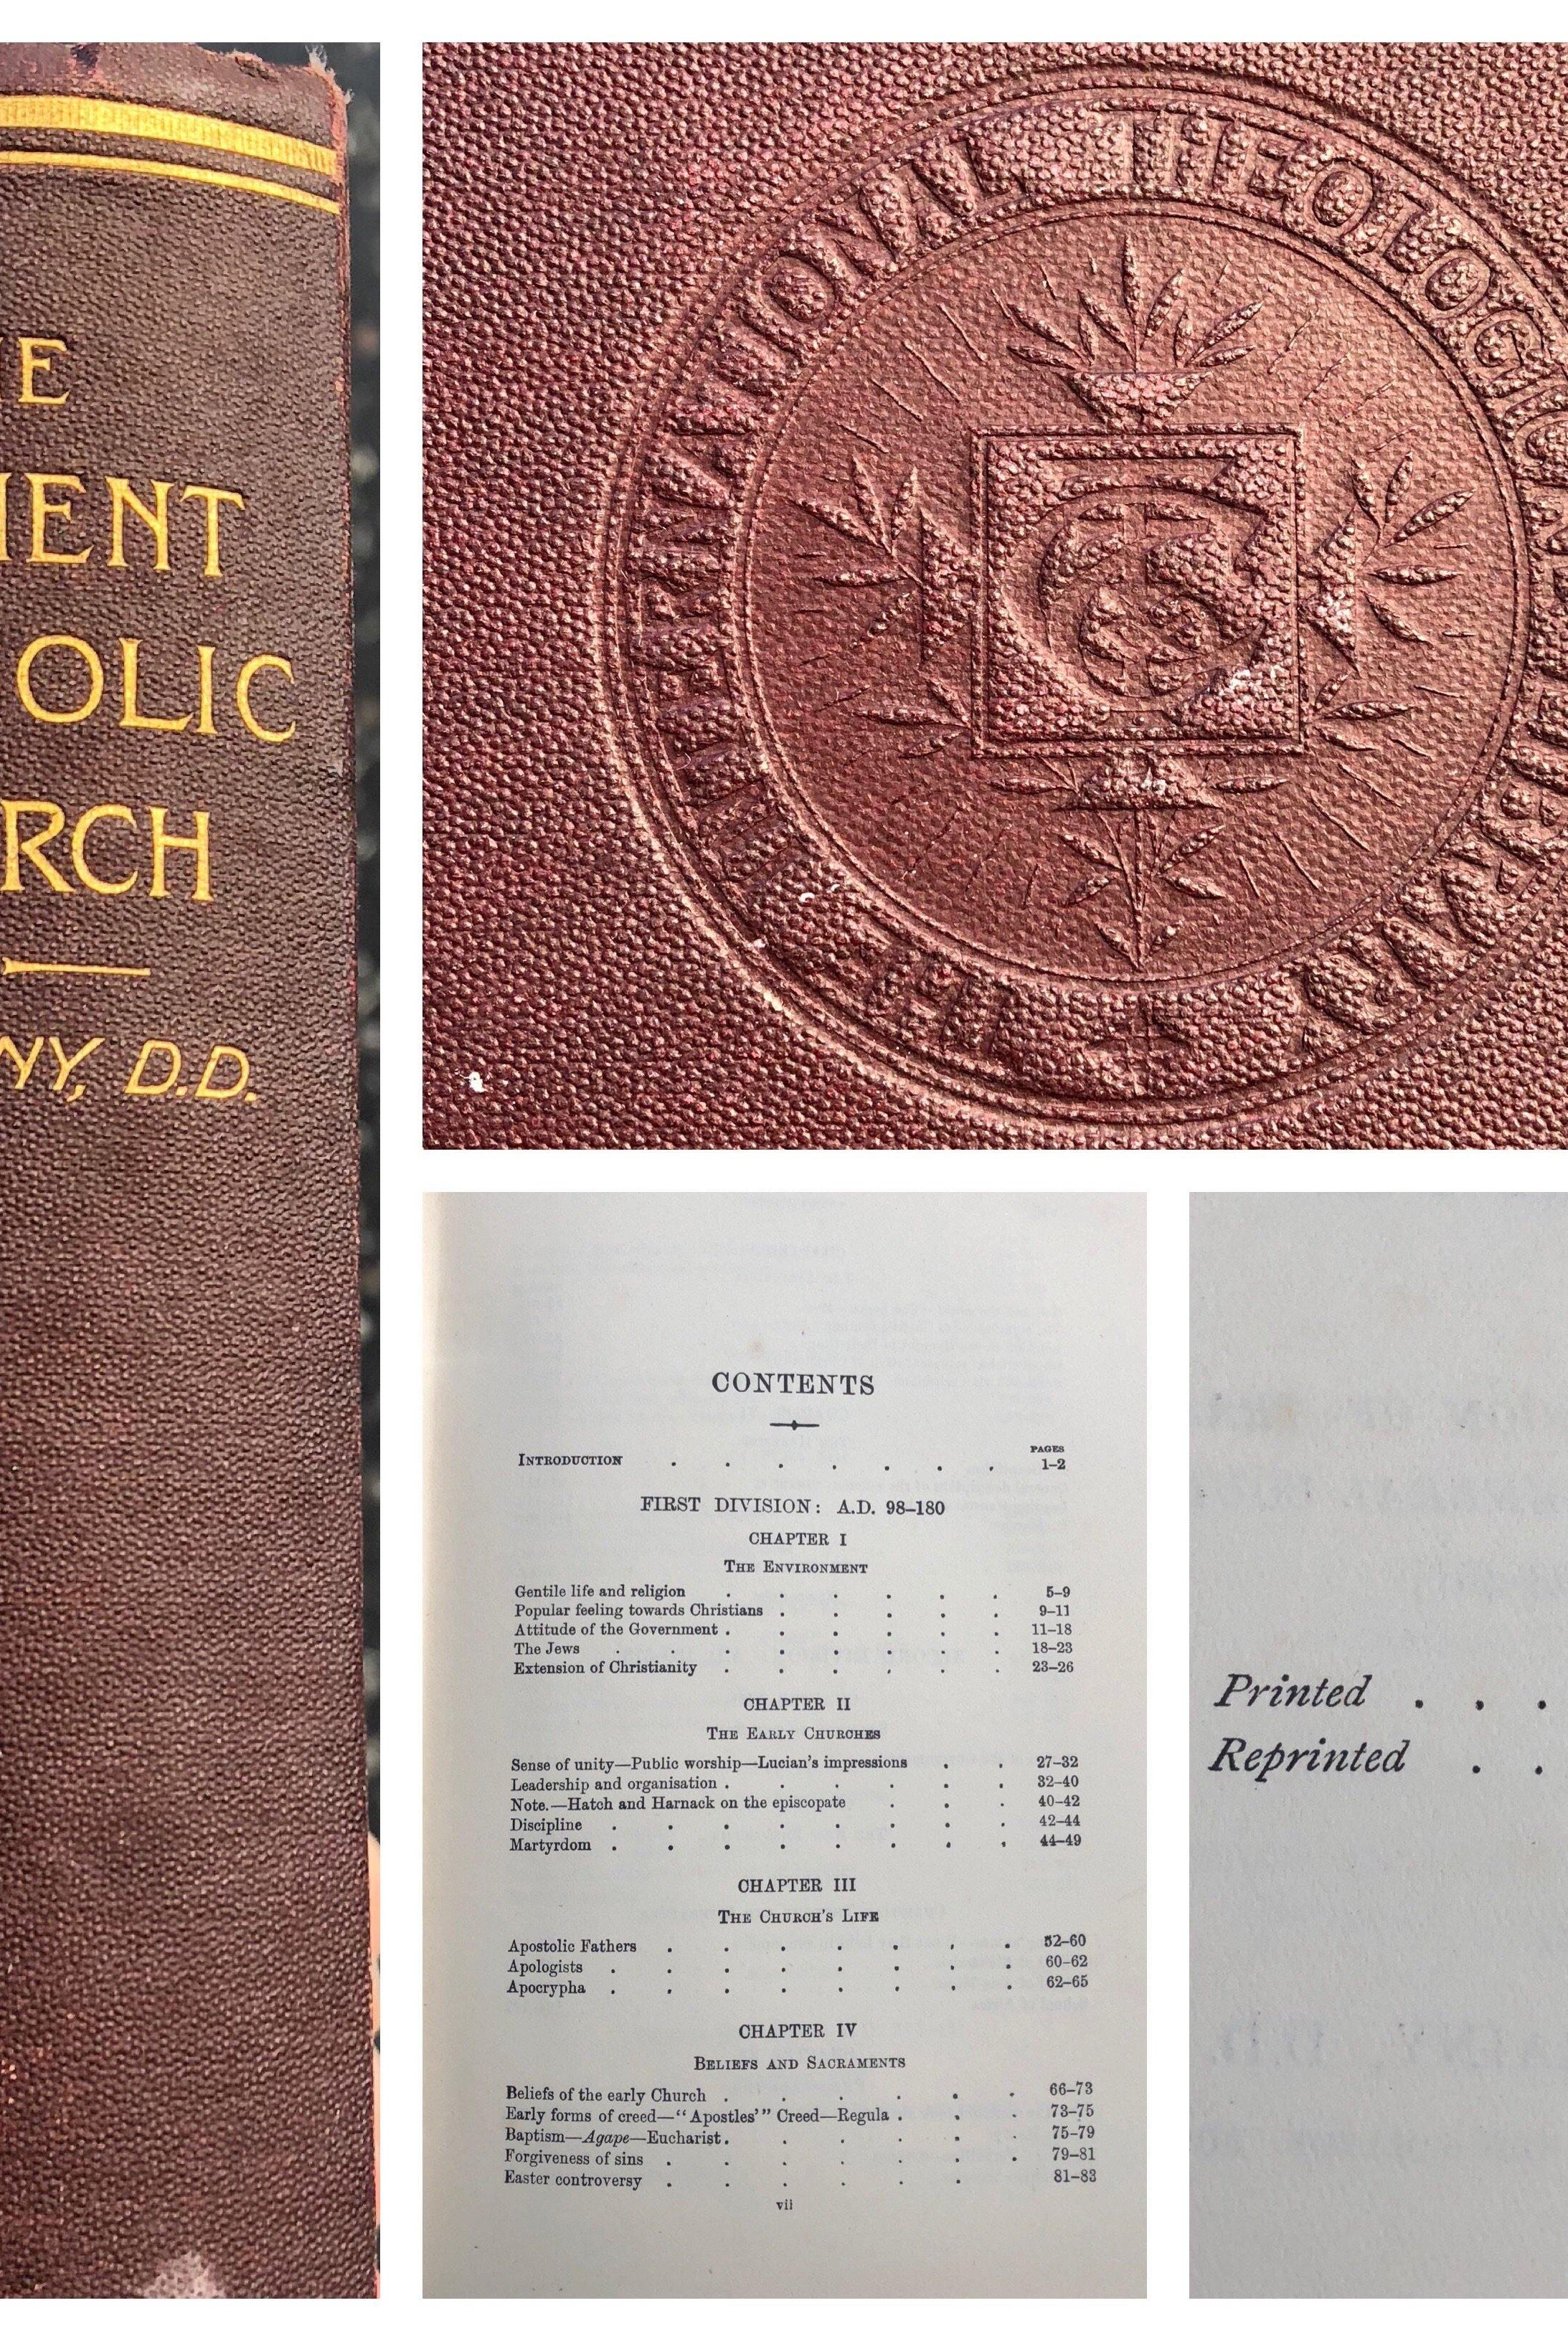 The Ancient Catholic Church : From the Accession of Trajan to the Fourth General Council (A.D. 98-451) 1913 Second Edition - Belfast Books